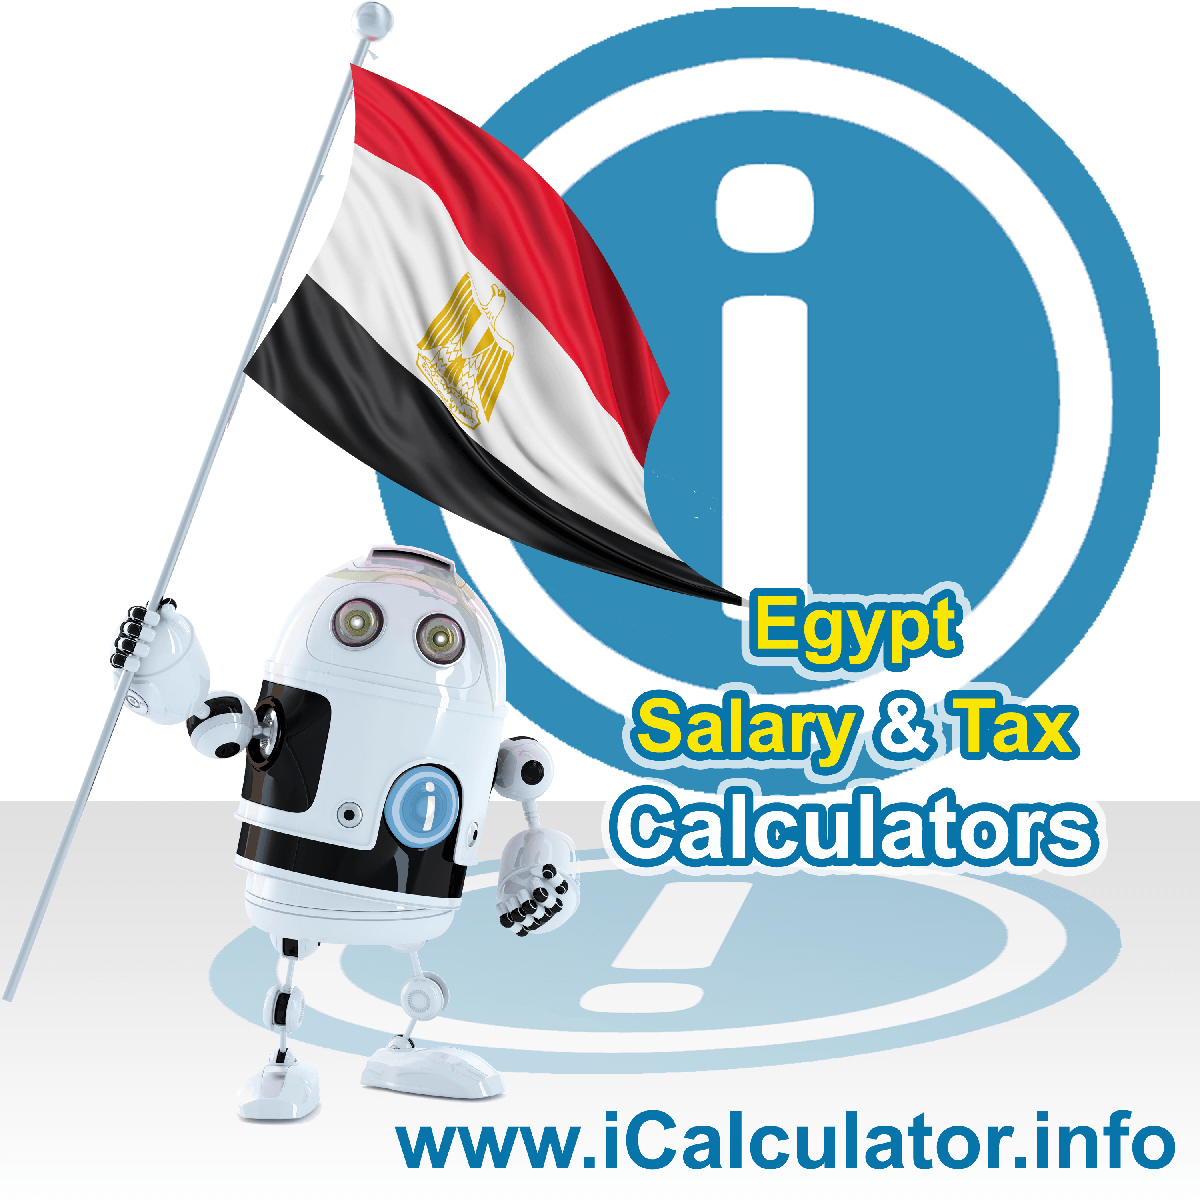 Egypt Wage Calculator. This image shows the Egypt flag and information relating to the tax formula for the Egypt Tax Calculator